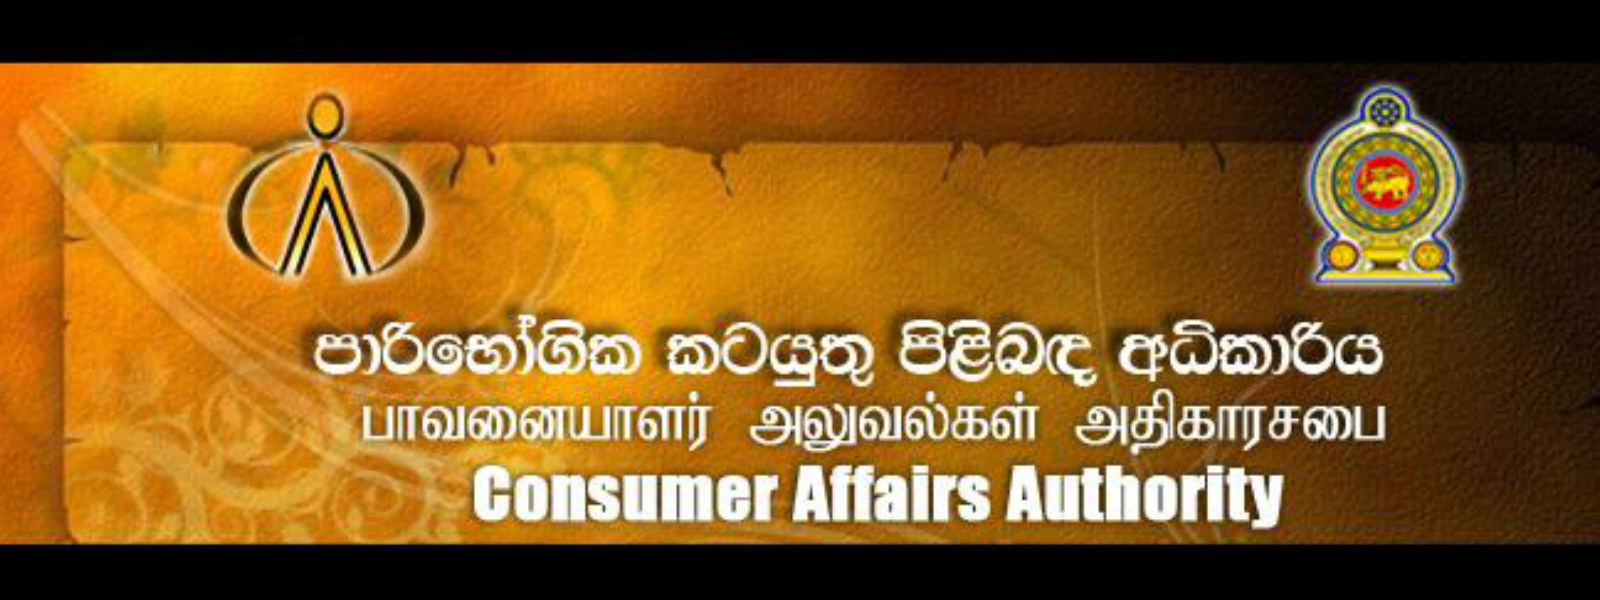 Consumer Affairs Authority to charge 1900 outlets